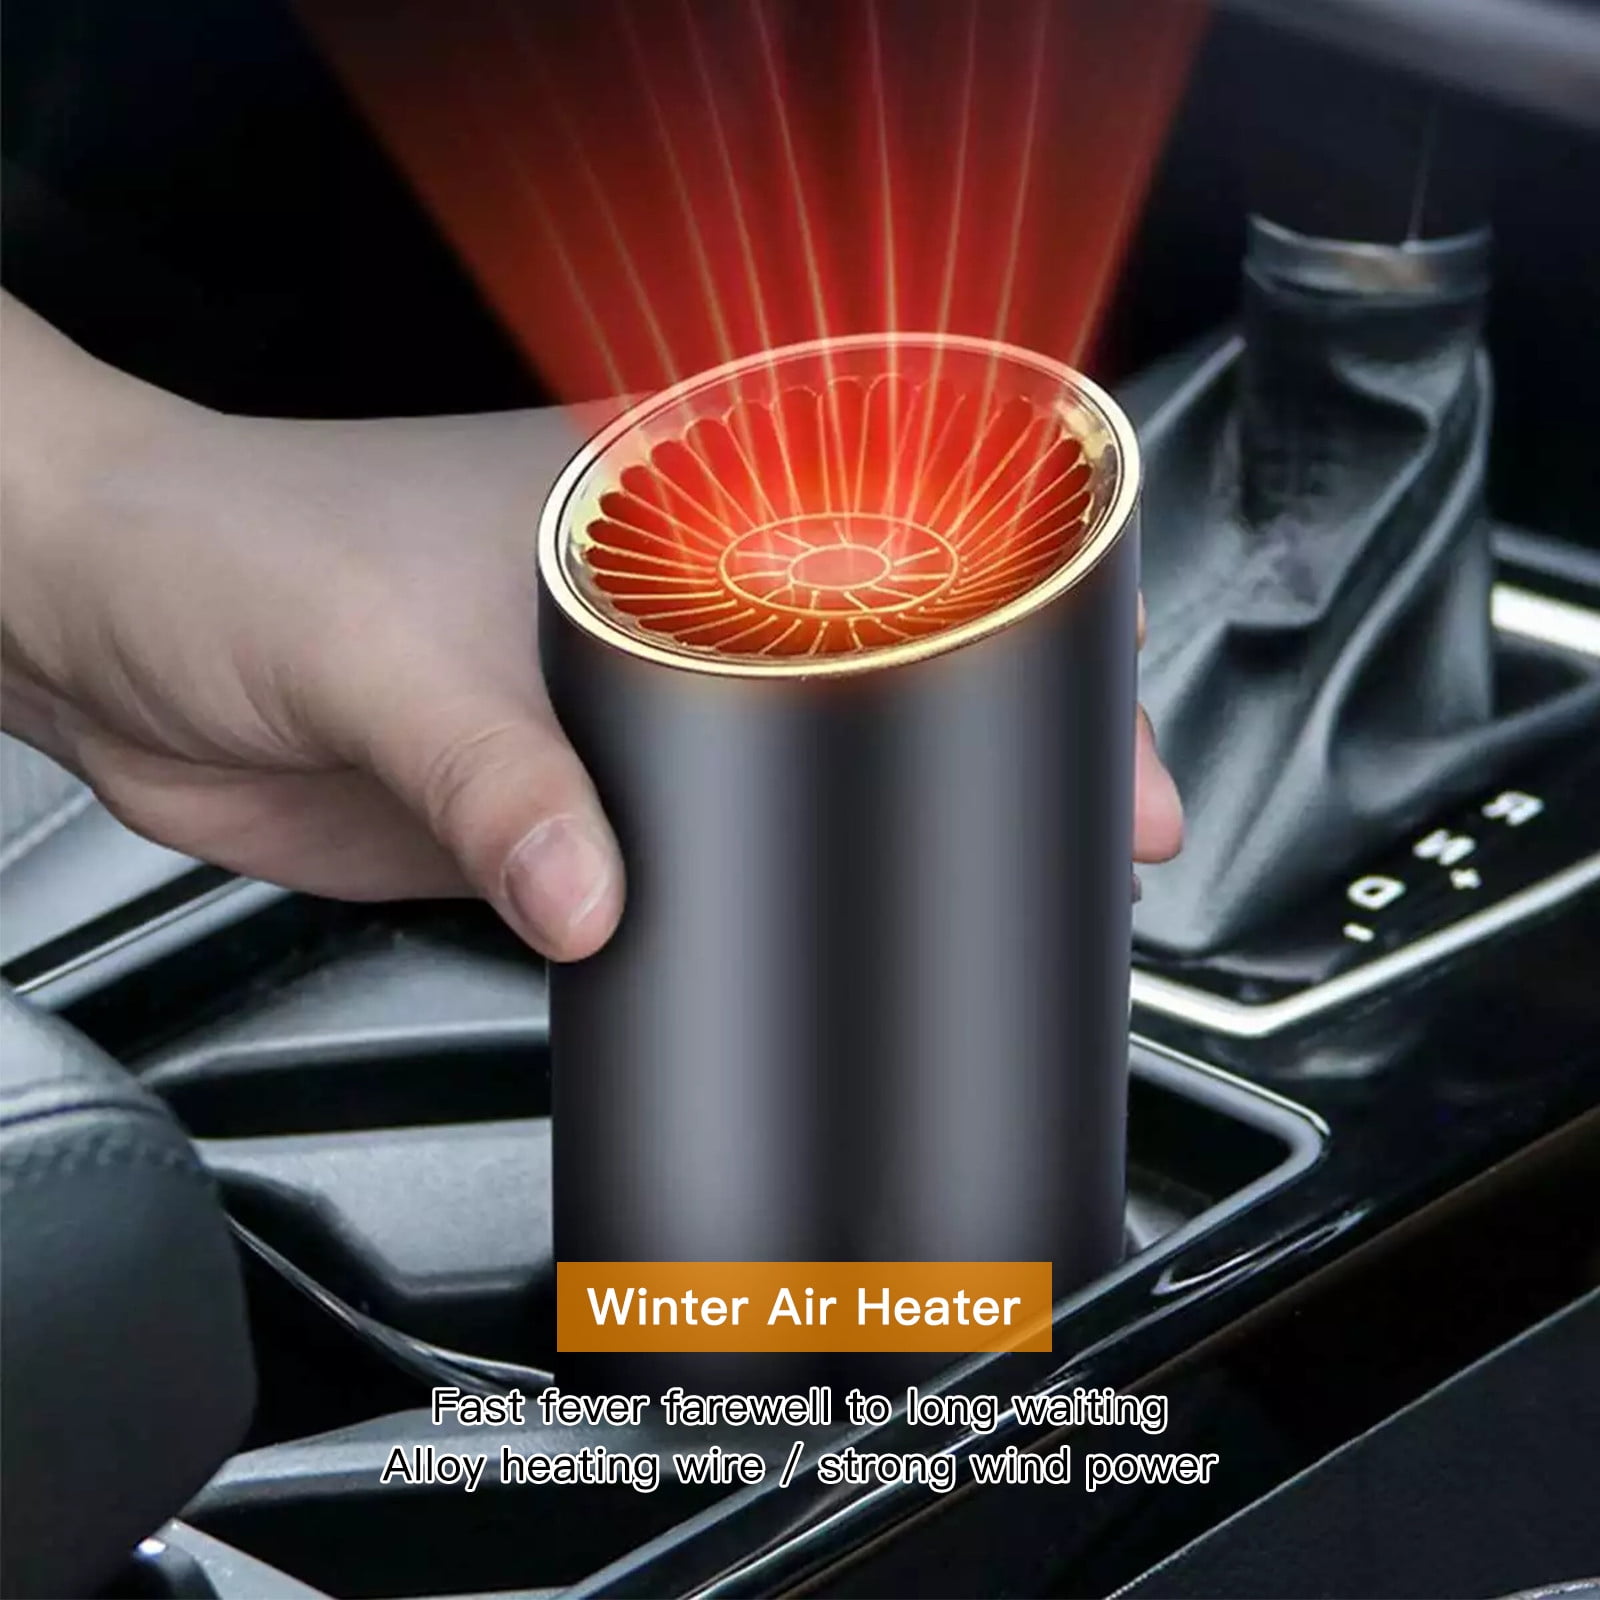 Portable Car Defogger, Car Defroster, Car Heater, Windshield Defroster That  Plugs Into Cigarette Lighter, Can Heat Rapidly In 30 Seconds From  Seepuelectronic, $7.24